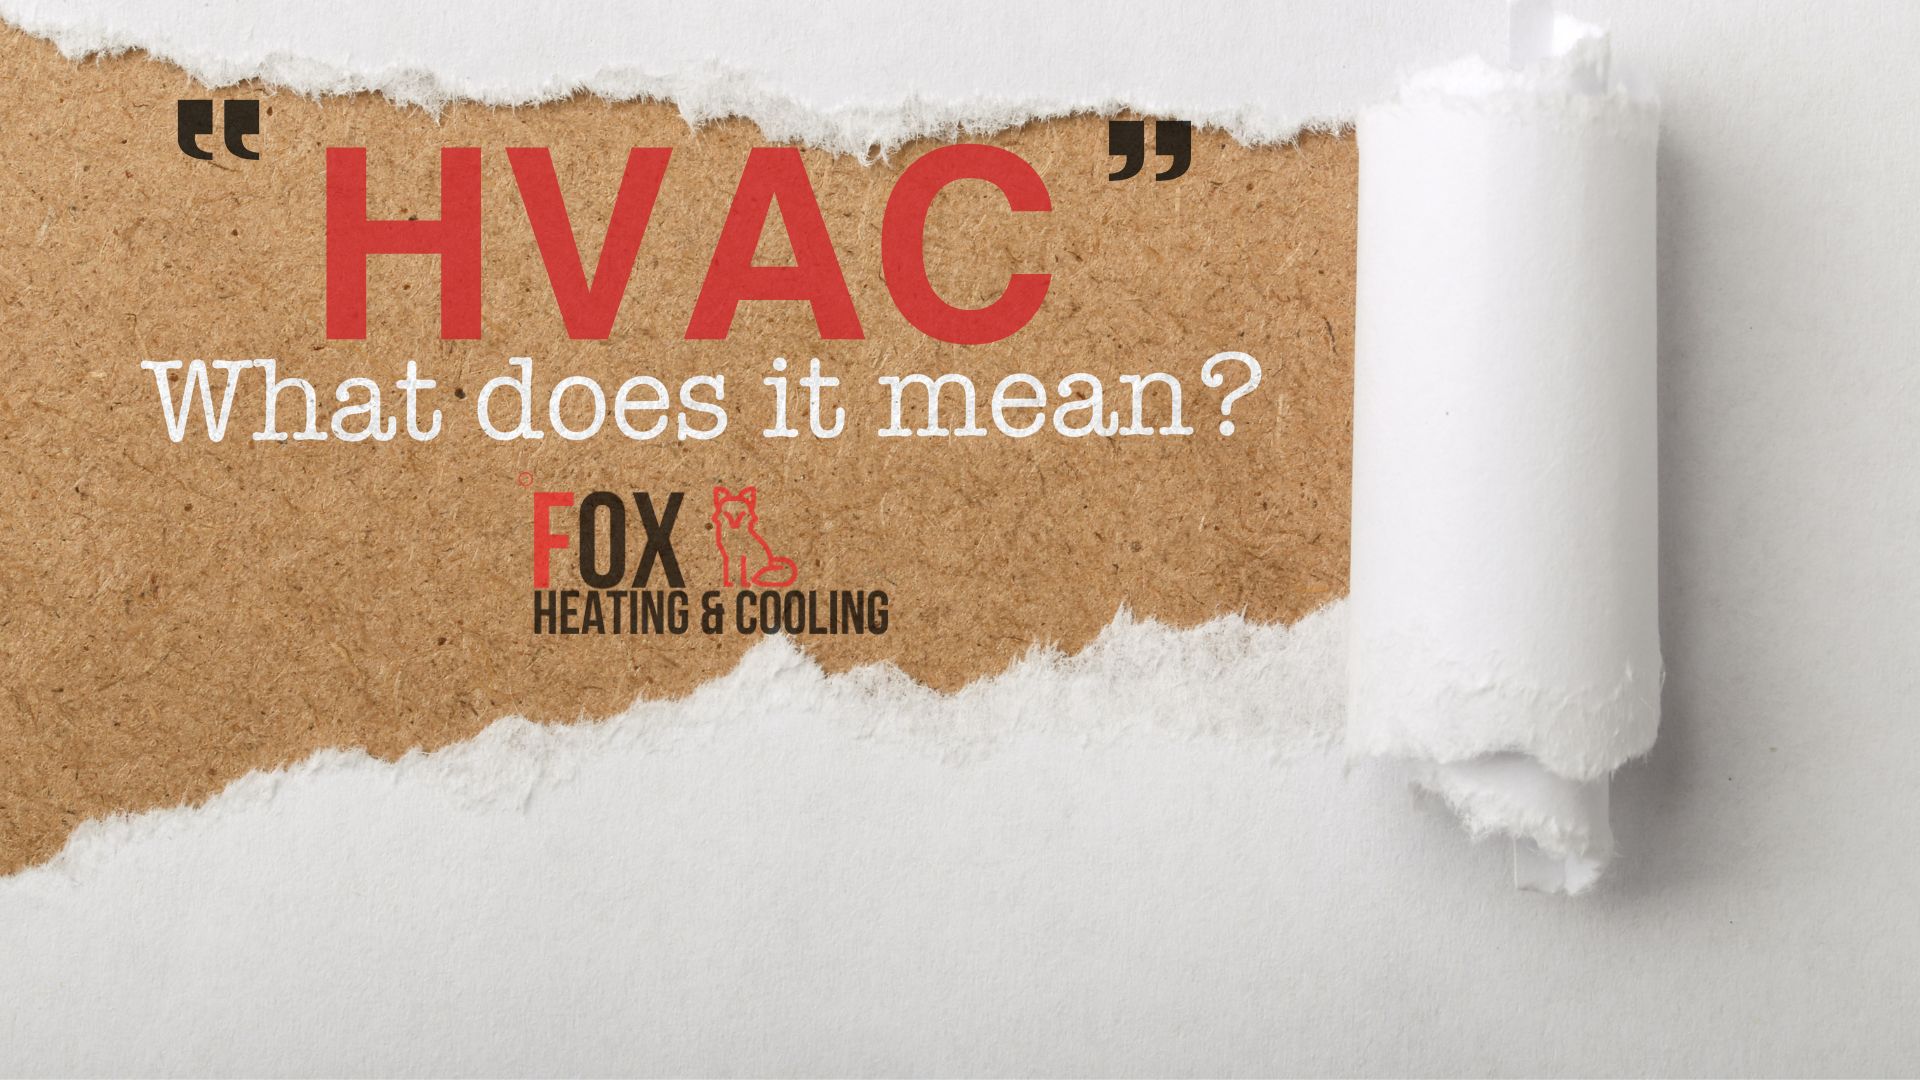 What does HVAC stand for?